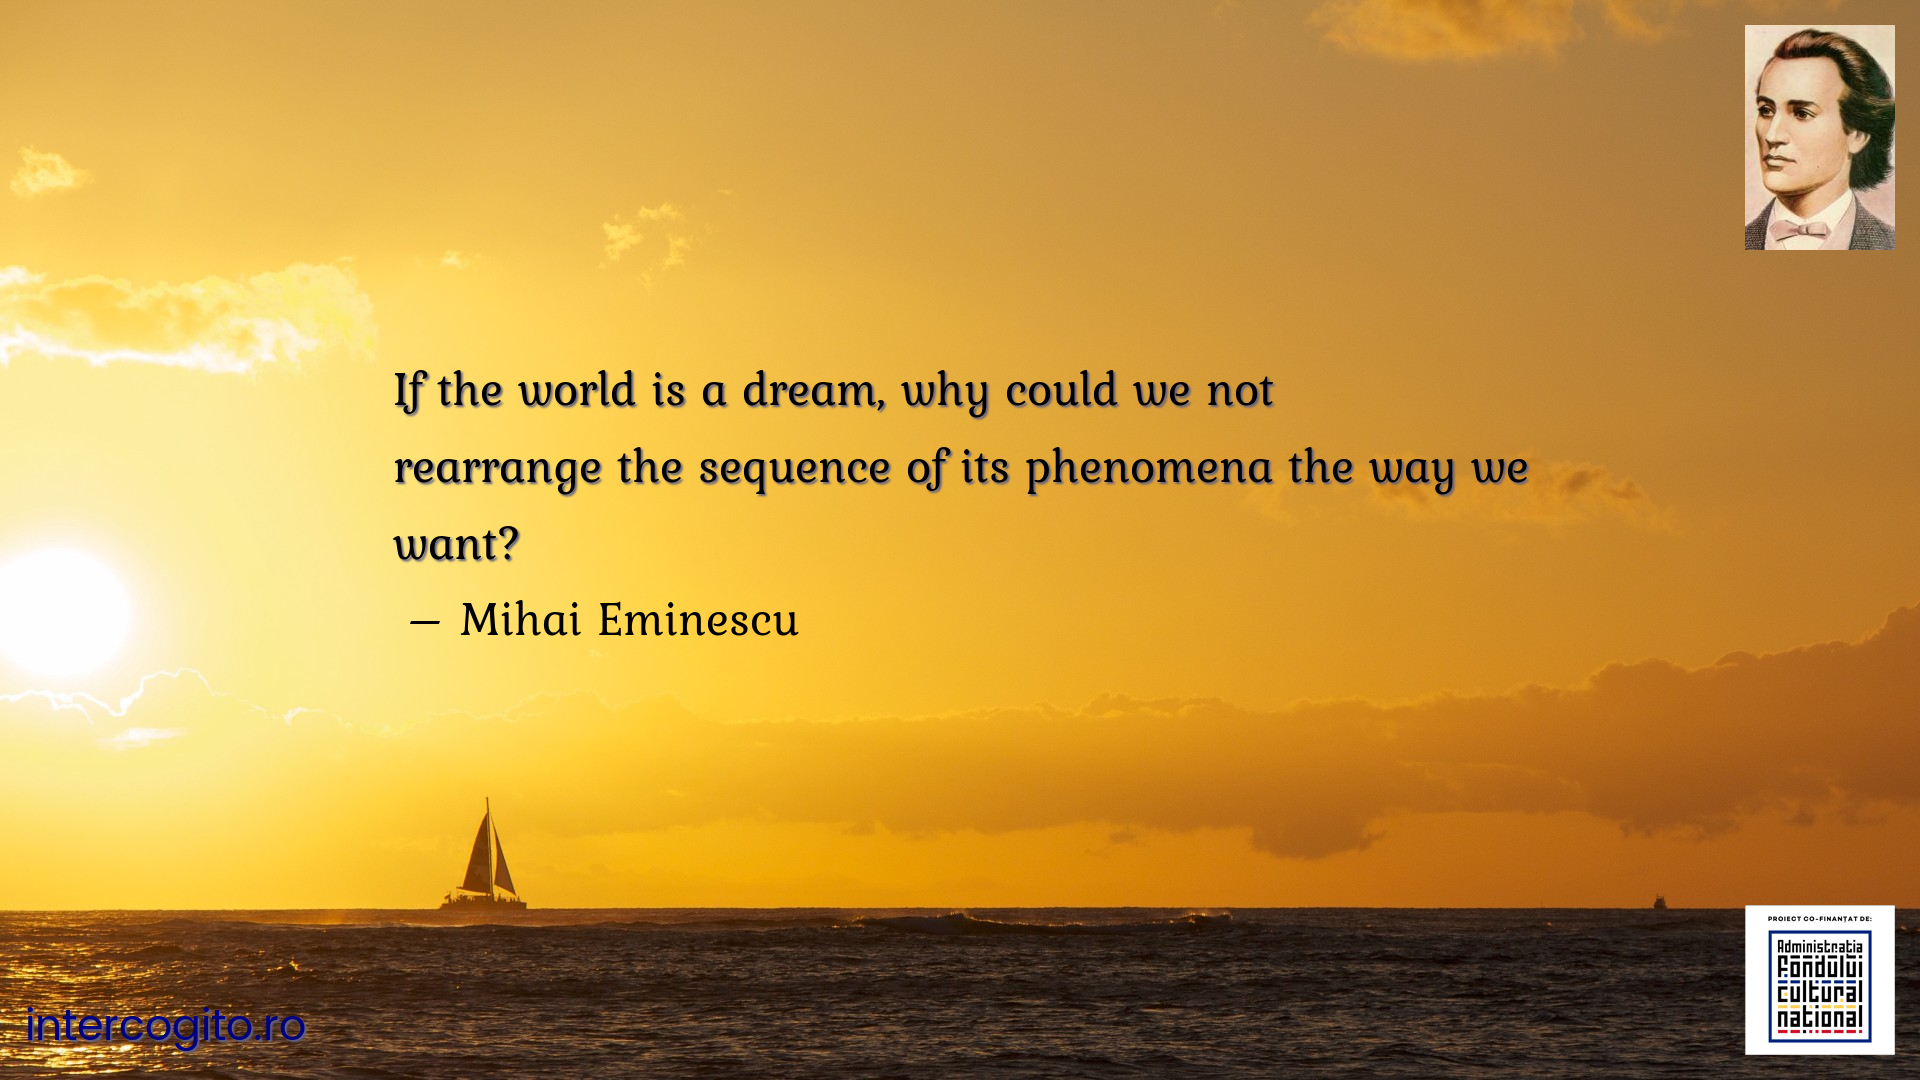 If the world is a dream, why could we not rearrange the sequence of its phenomena the way we want?